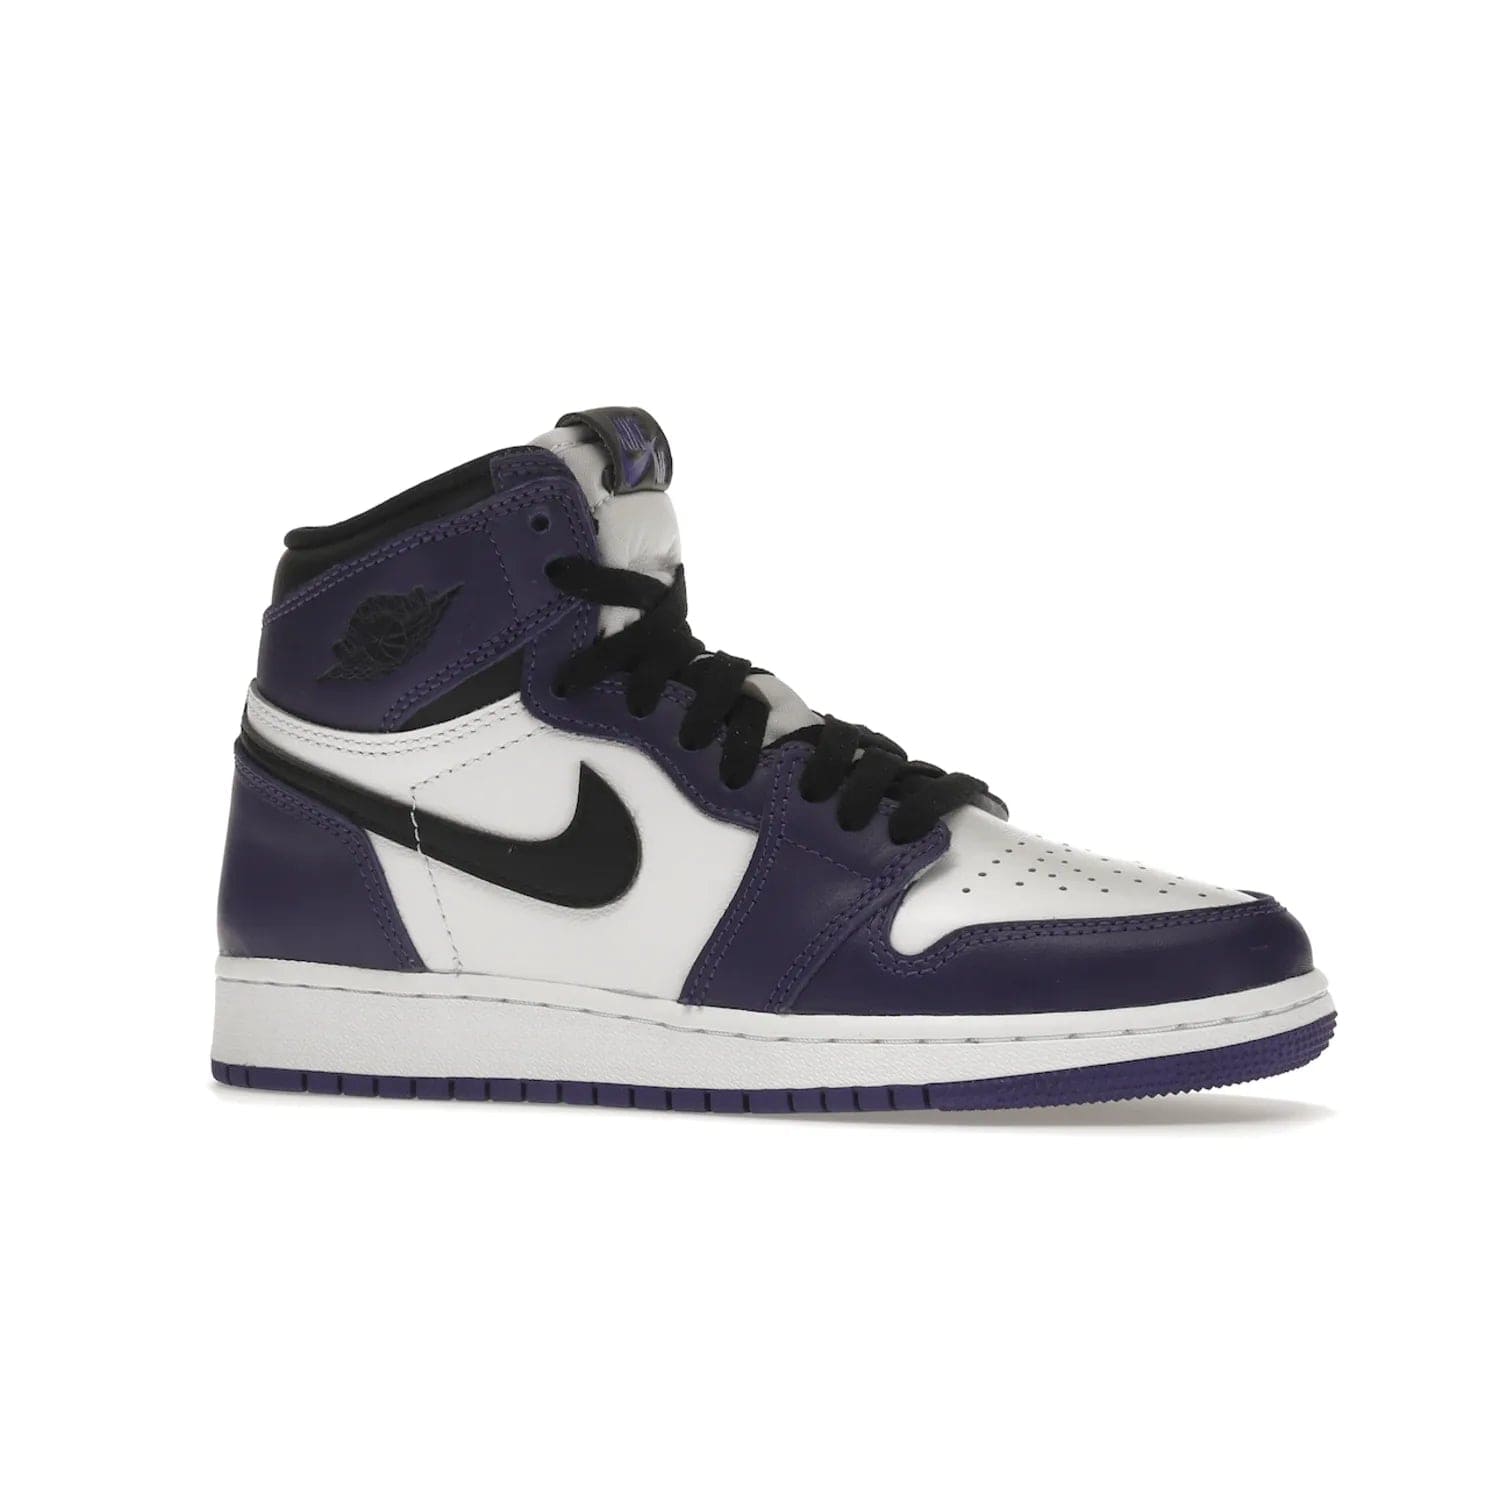 Jordan 1 Retro High Court Purple White (GS) - Image 3 - Only at www.BallersClubKickz.com - The Air Jordan 1 Retro High Court Purple is here and young sneaker heads can show off classic style. Features a white tumbled leather upper, black swoosh, purple overlays, black collar with purple overlay, white tongue, black patch with purple Nike Air logo and swoosh, white midsole, and purple rubber outsole with circular pattern.